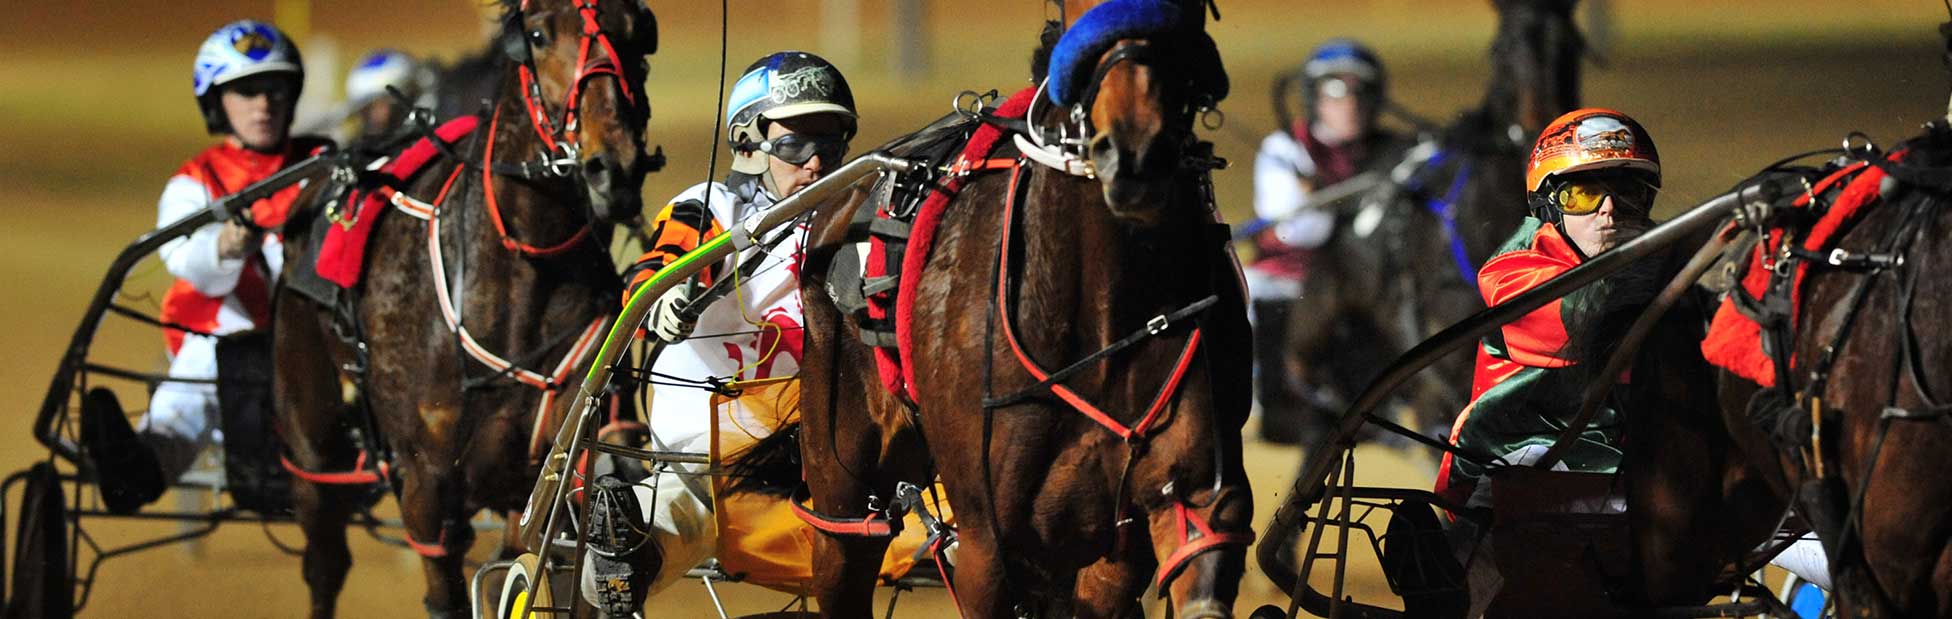 Group of harness racing horses